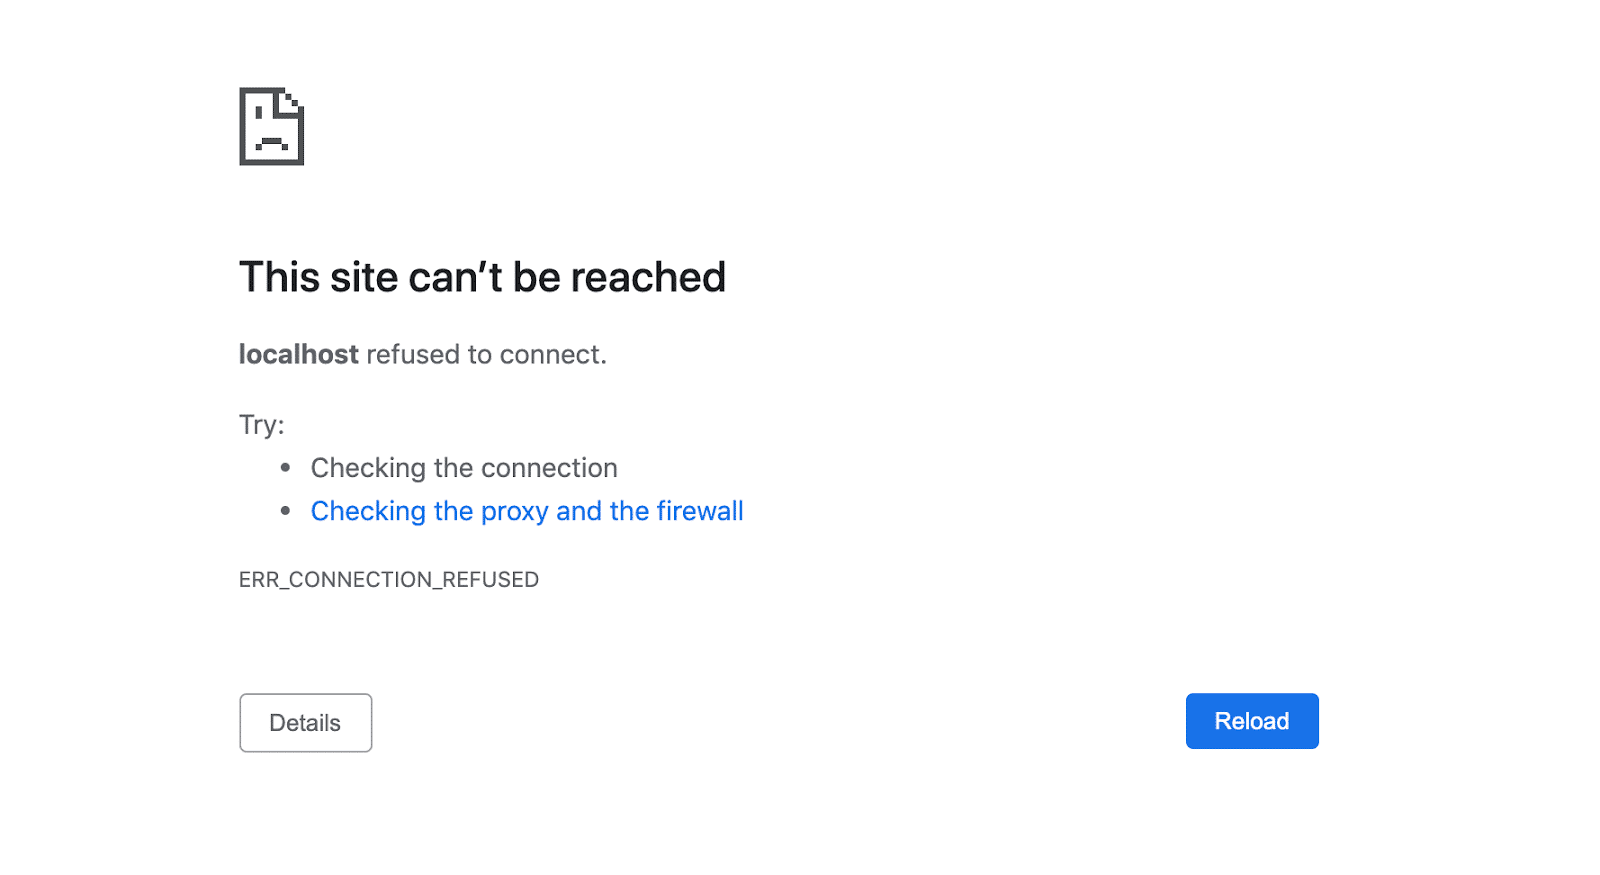 The ERR_CONNECTION_REFUSED page in Chrome.